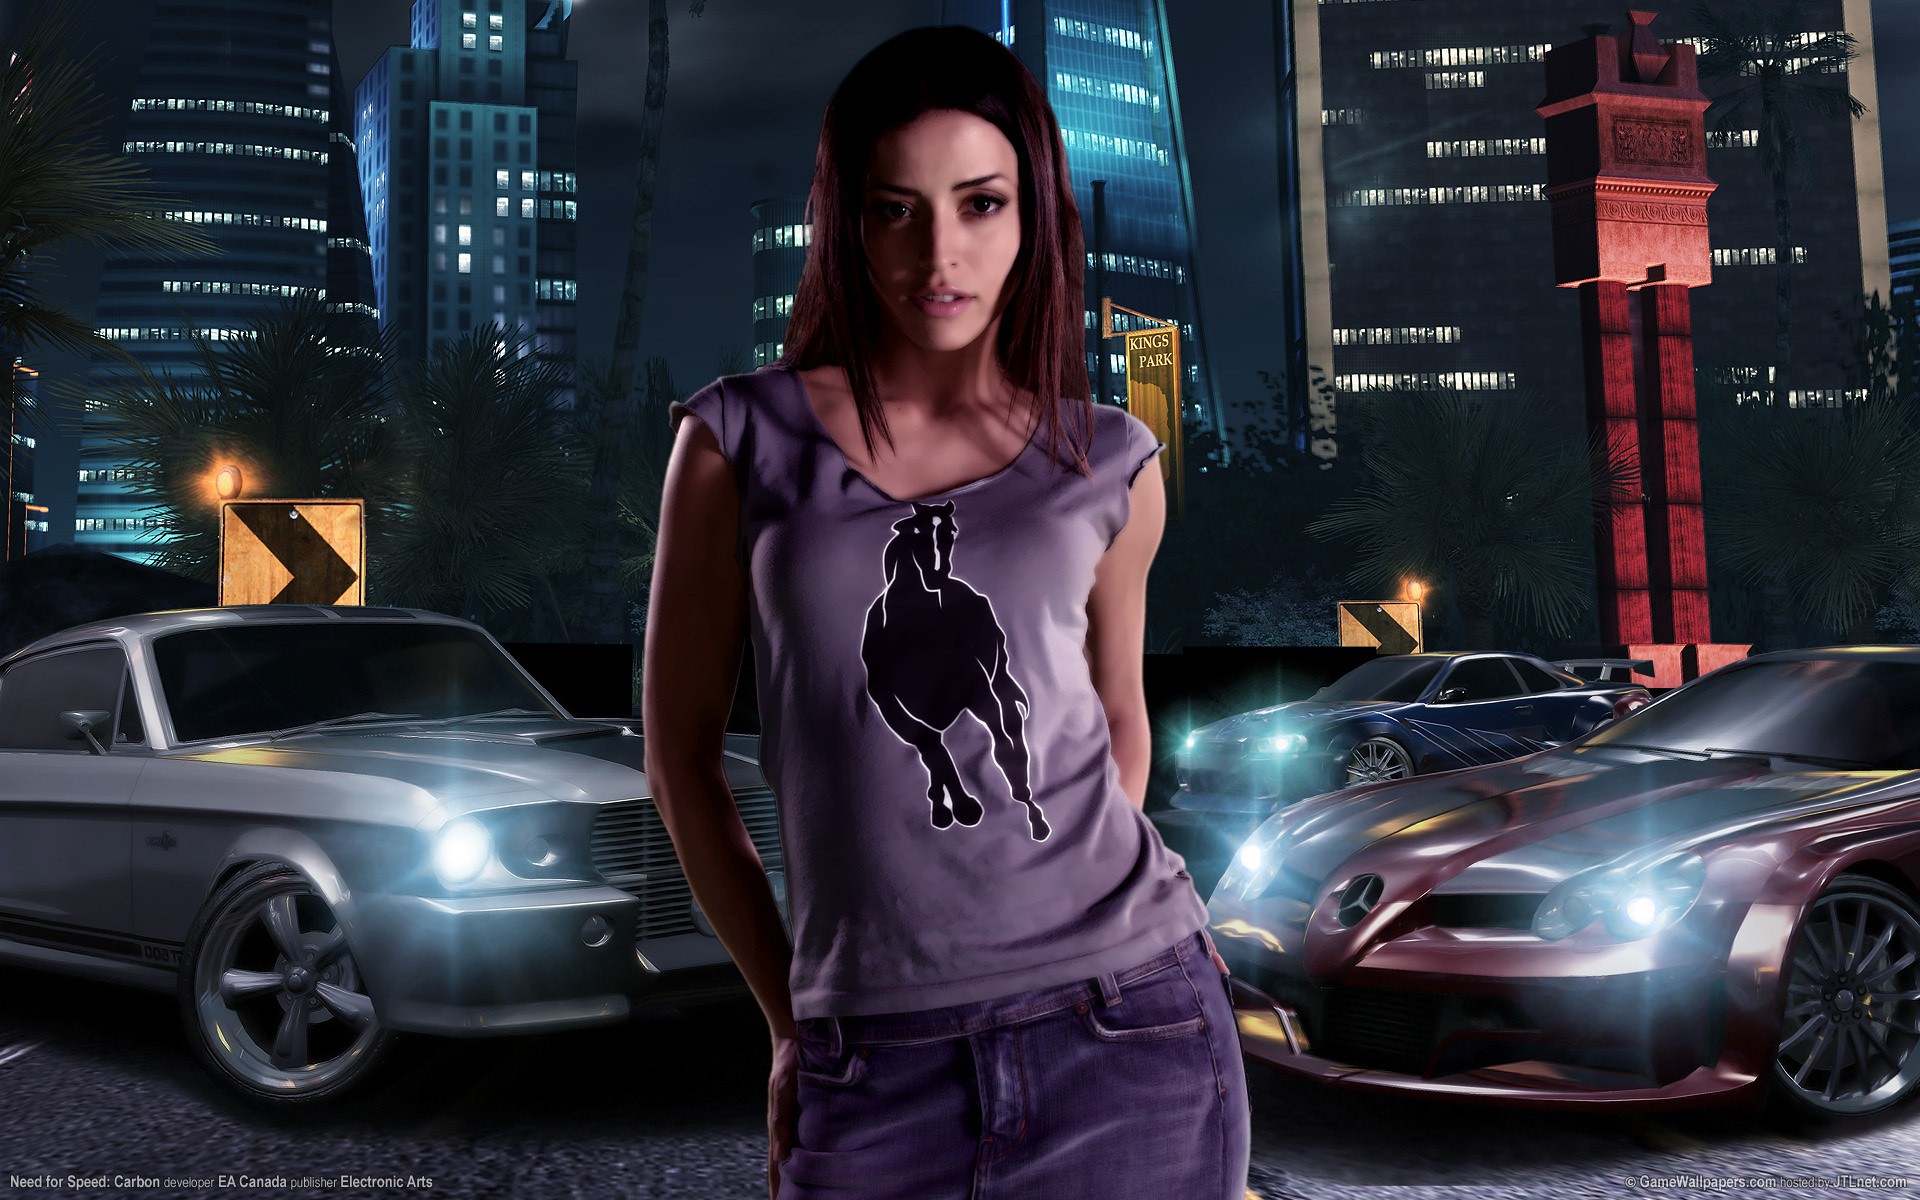 General 1920x1200 Need for Speed Need for Speed: Carbon car vehicle video games Emmanuelle Vaugier video game girls purple clothing EA Games women with cars